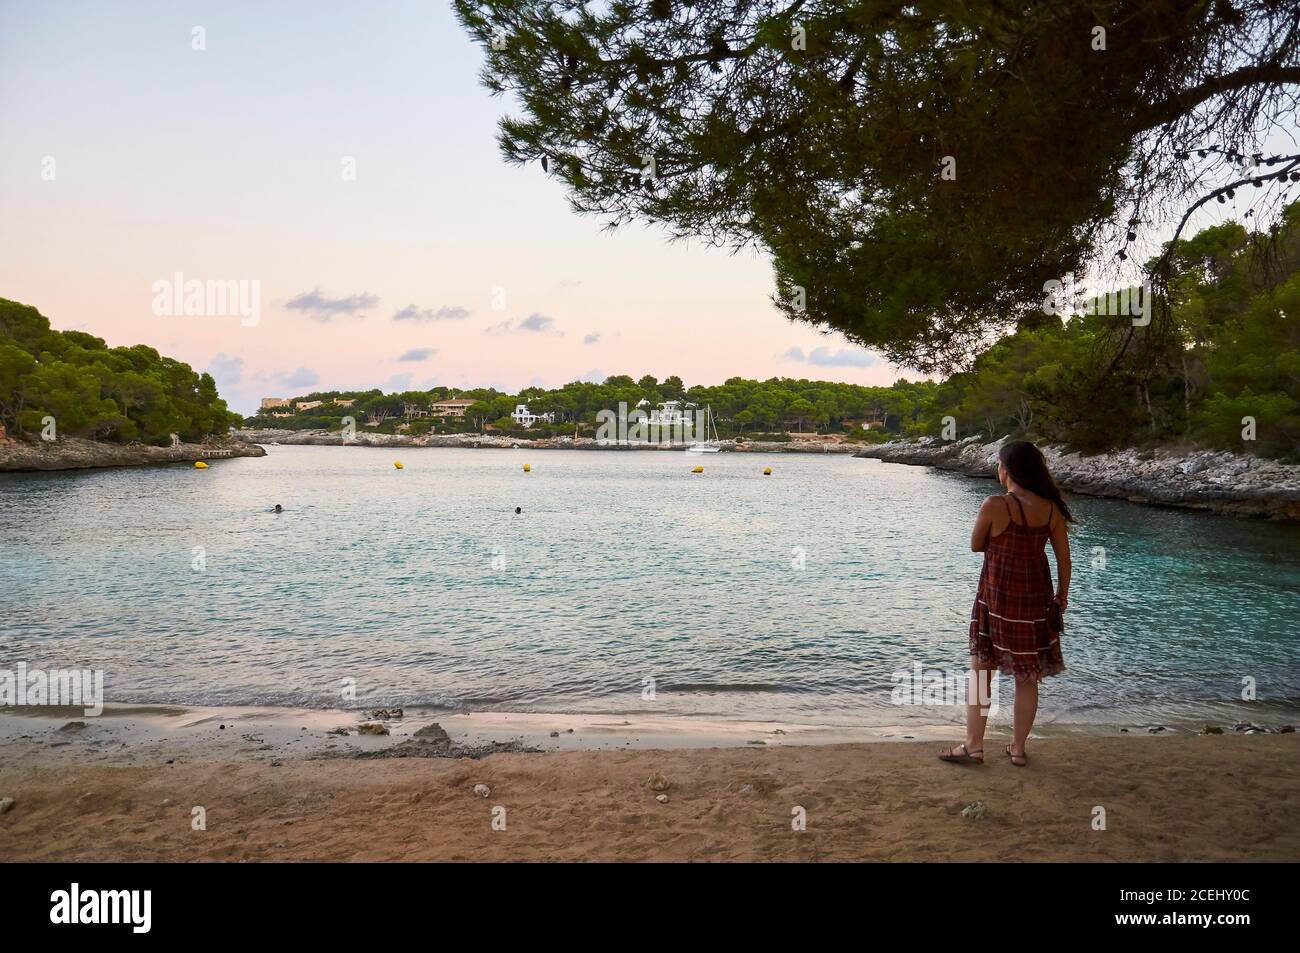 Woman at Caló des Homes Morts beach shore at sunset with villas in the background (Santanyí, Majorca, Balearic Islands, Mediterranean sea, Spain) Stock Photo